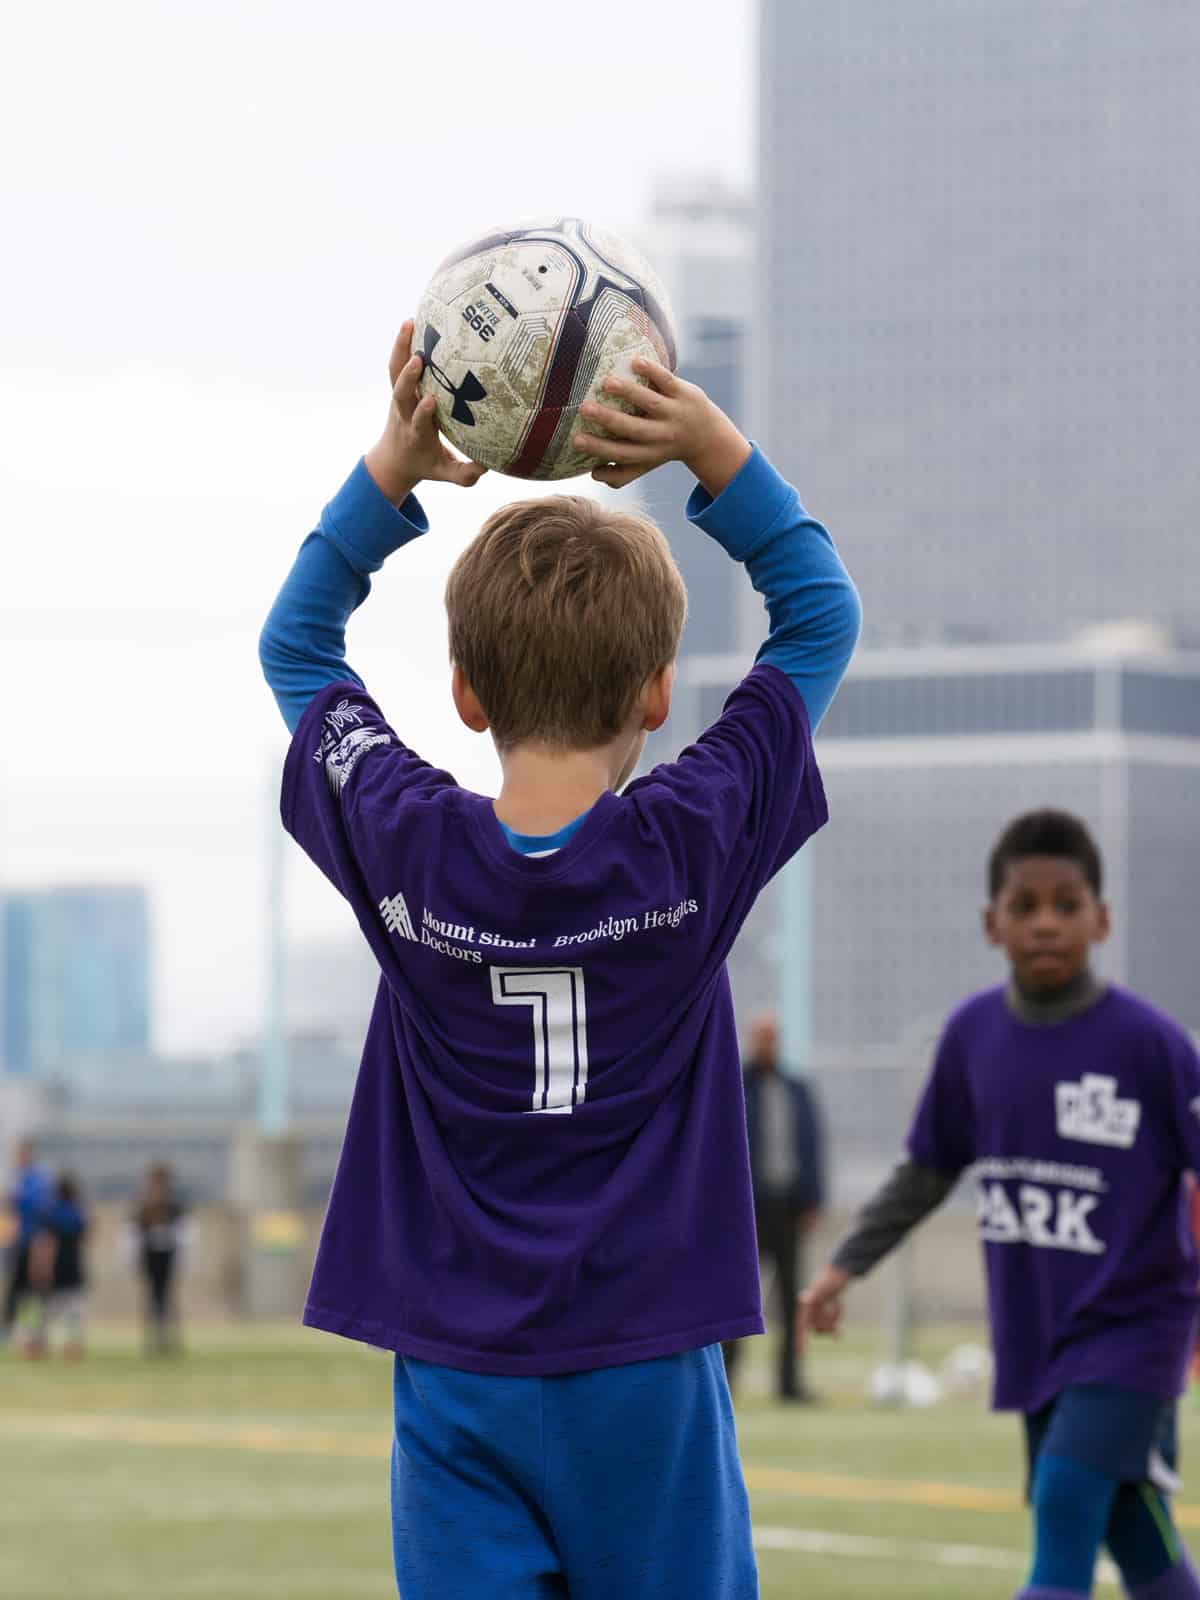 Young boy holds a soccer ball over his head on a cloudy day.